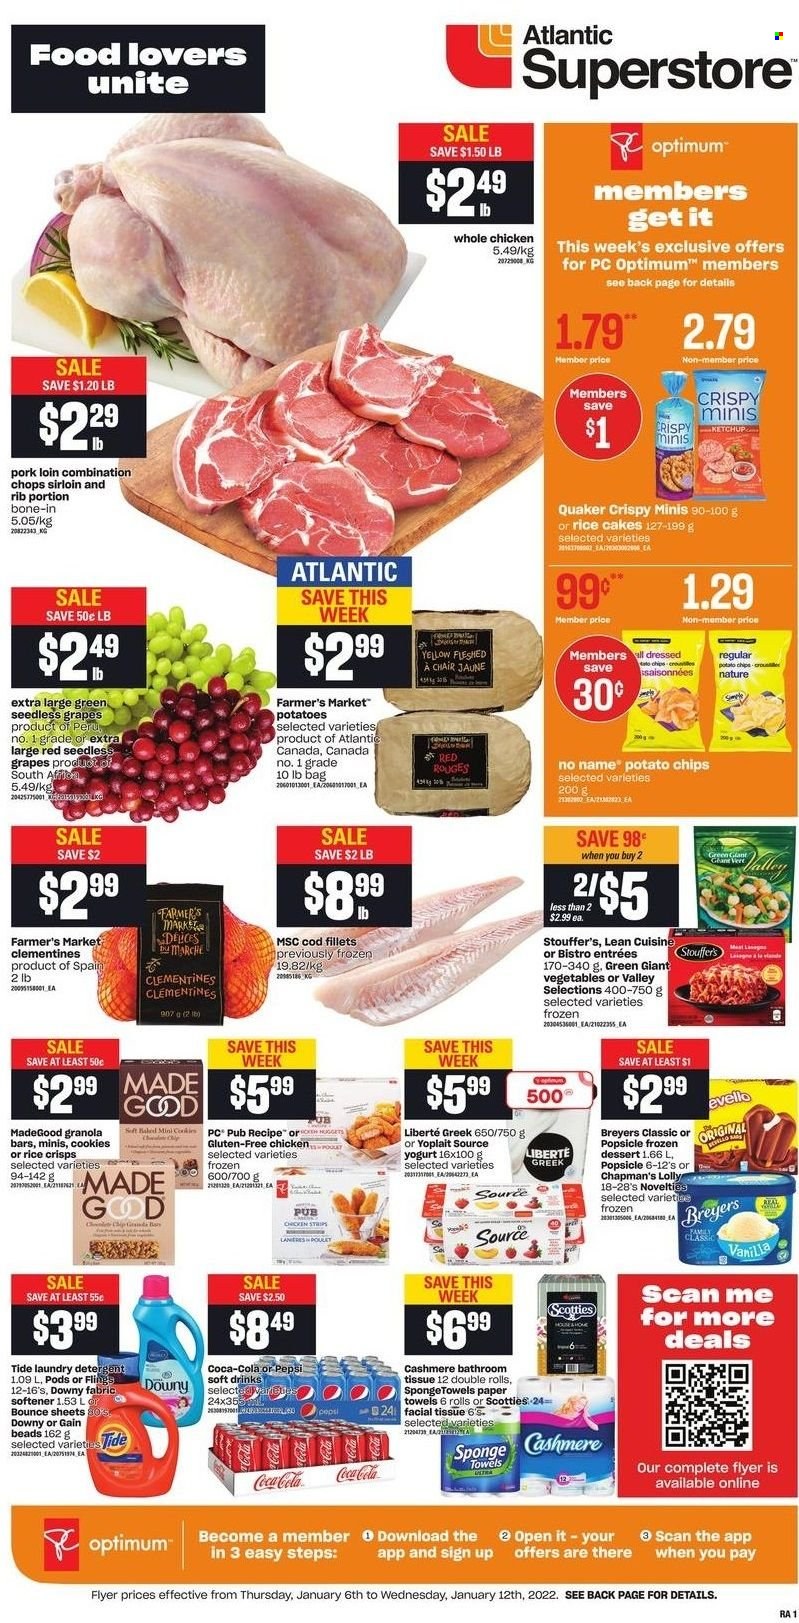 thumbnail - Atlantic Superstore Flyer - January 06, 2022 - January 12, 2022 - Sales products - clementines, grapes, seedless grapes, cod, No Name, Quaker, Lean Cuisine, yoghurt, Yoplait, Stouffer's, cookies, lollipop, potato chips, rice crisps, granola bar, Coca-Cola, Pepsi, soft drink, L'Or, whole chicken, chicken, pork loin, pork meat, bath tissue, kitchen towels, paper towels, Gain, Tide, fabric softener, laundry detergent, Bounce, Downy Laundry, Optimum, detergent, ketchup. Page 1.